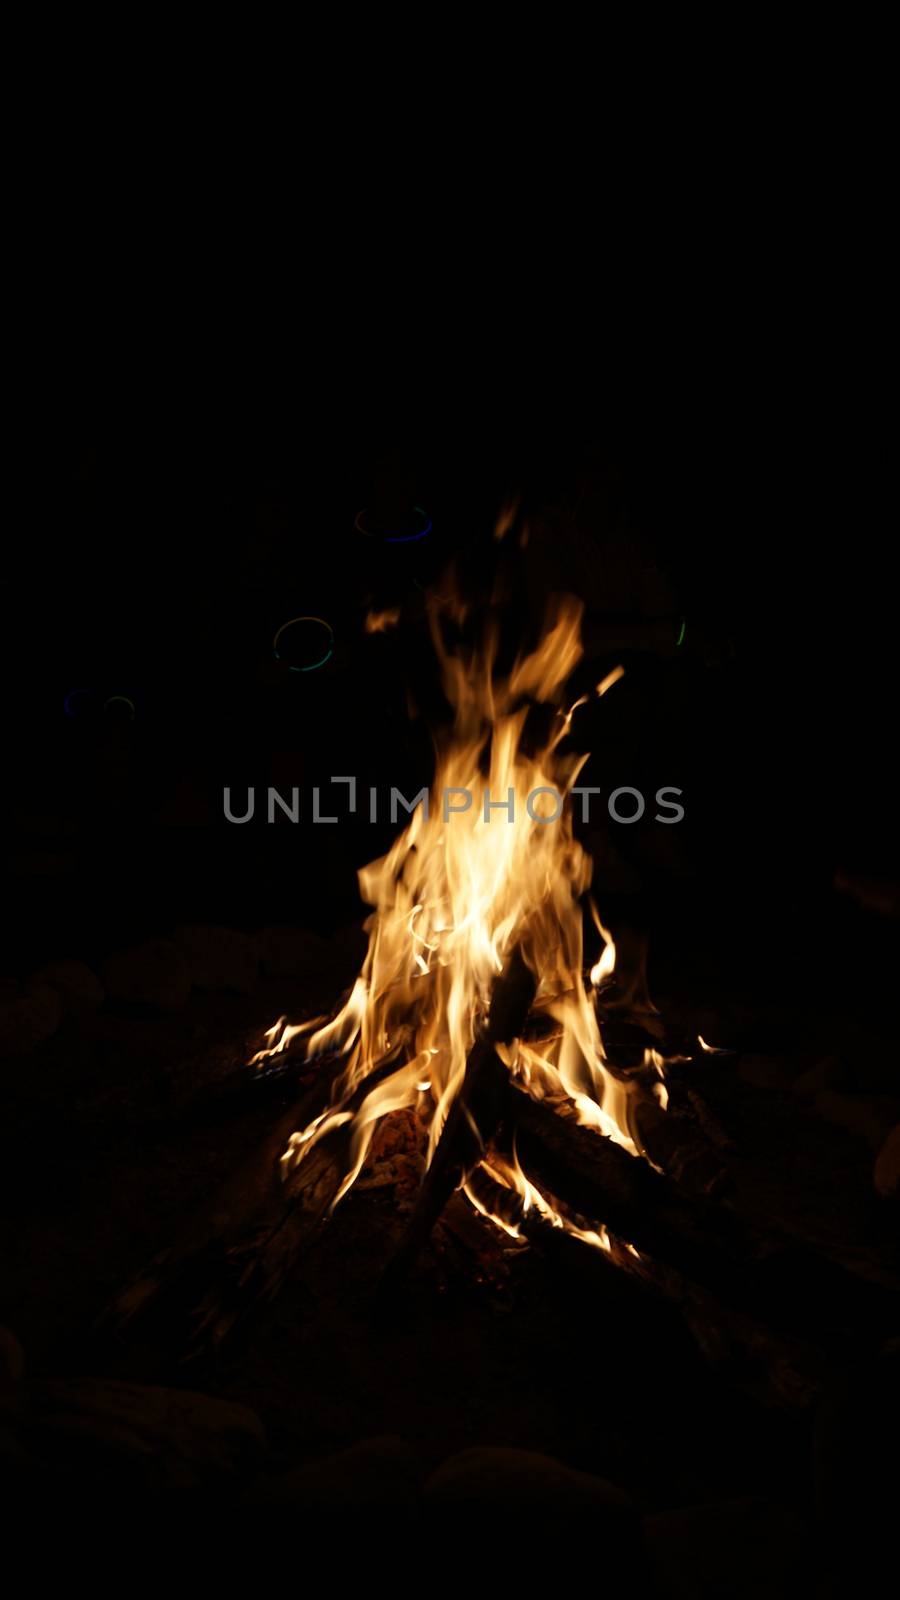 A fire is burning. People make marshmallows. Sparks fly from the fire. The embers glow. People enjoy the warmth, have a picnic and sit around the fire. They throw wood on the fire. Outdoor recreation.